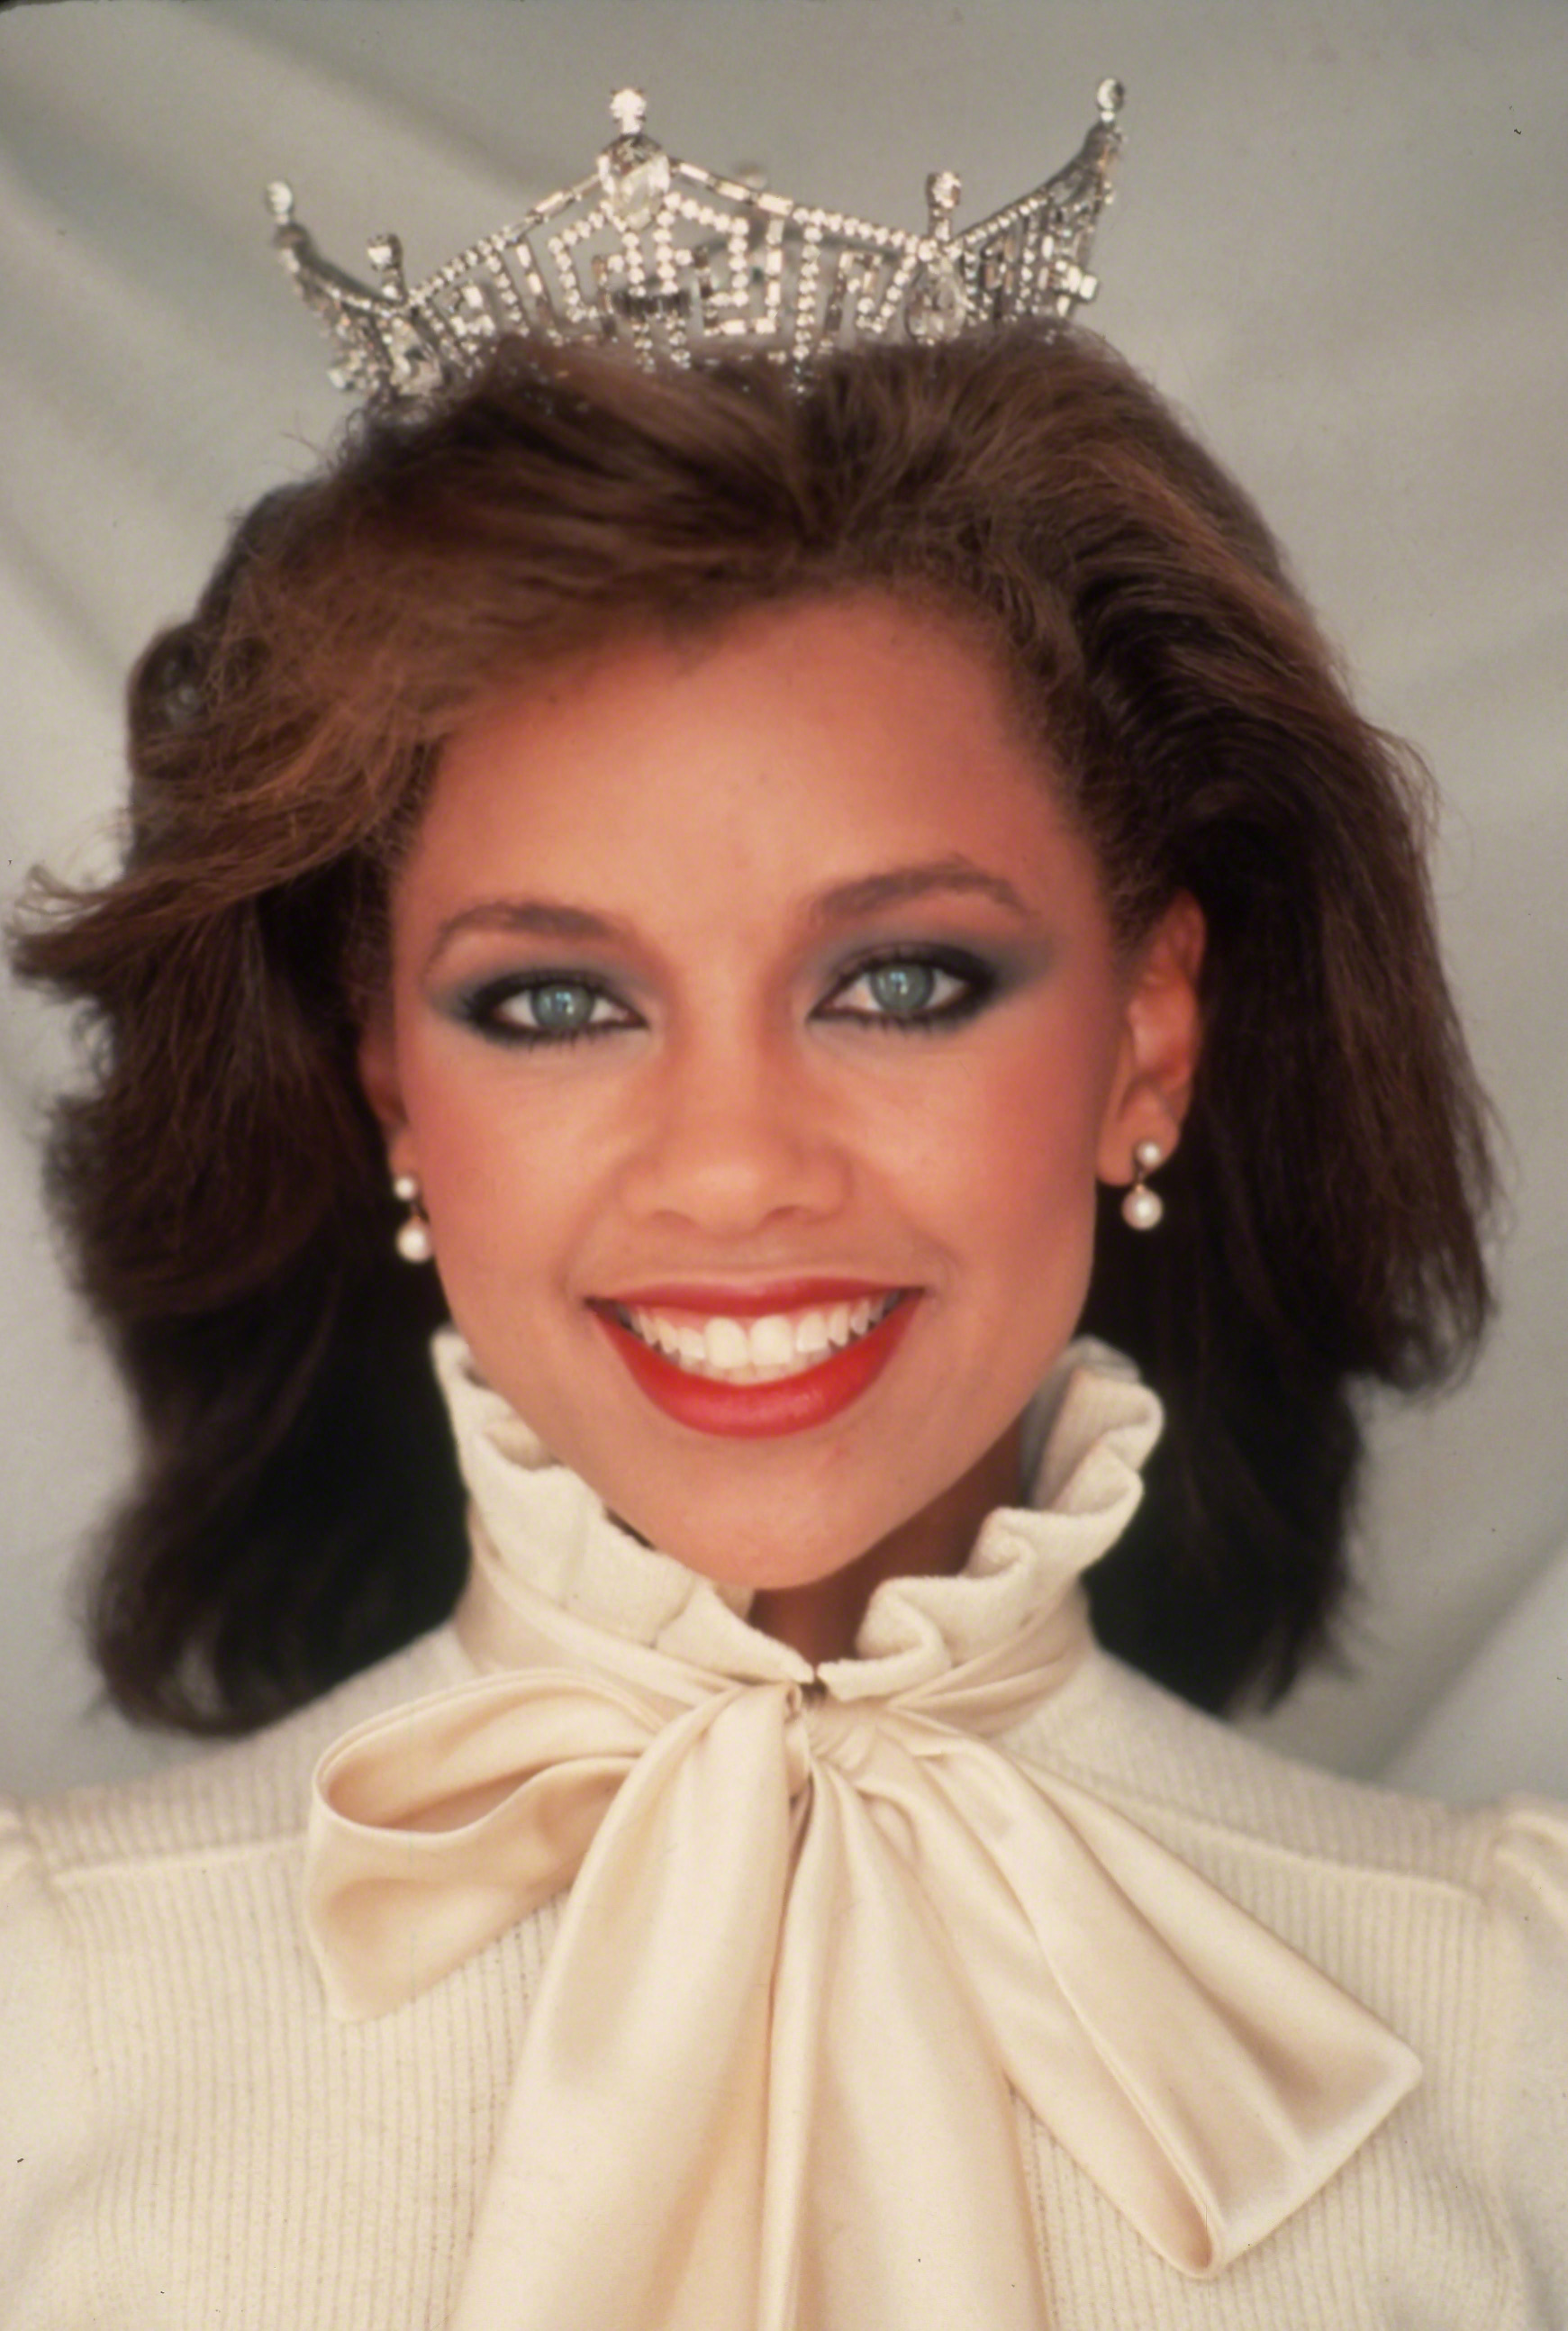 <p>Vanessa Williams made history in 1983 when she was crowned Miss America -- the first Black woman to win the pageant. Sadly, her reign was cut short when photos of Vanessa posing in he buff surfaced, causing a storm of controversy. She was forced to resign in 1984 and runner-up Suzette Charles, who was also a Black woman, took over the title. Miss America CEO Sam Haskell offered Vanessa a public apology 32 years later in 2016.</p>